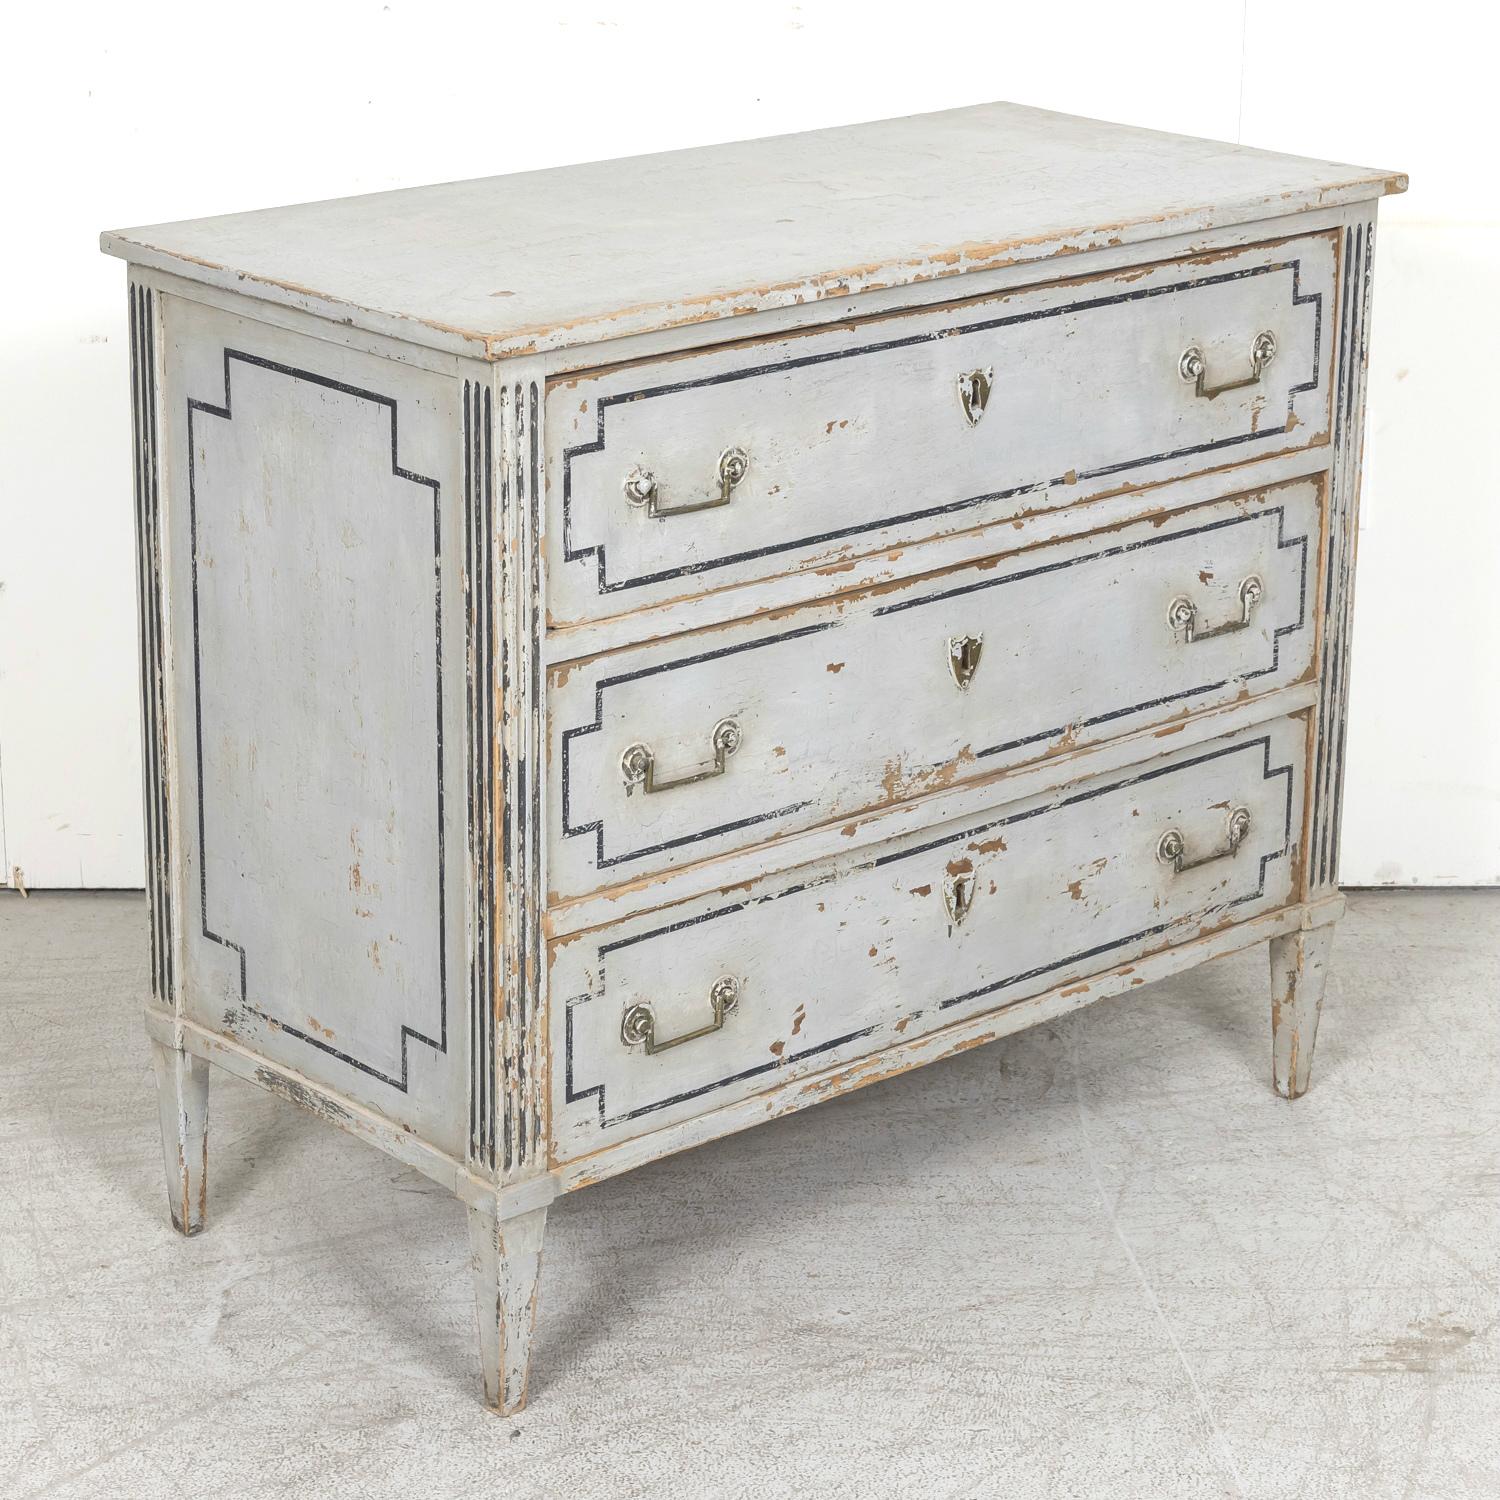 A handsome 19th century French Louis XVI style painted wooden commode or chest of drawers handcrafted in Provence, having a wonderfully distressed blue gray painted finish with dark charcoal accents, circa 1890s. A rectangular top sits above a case